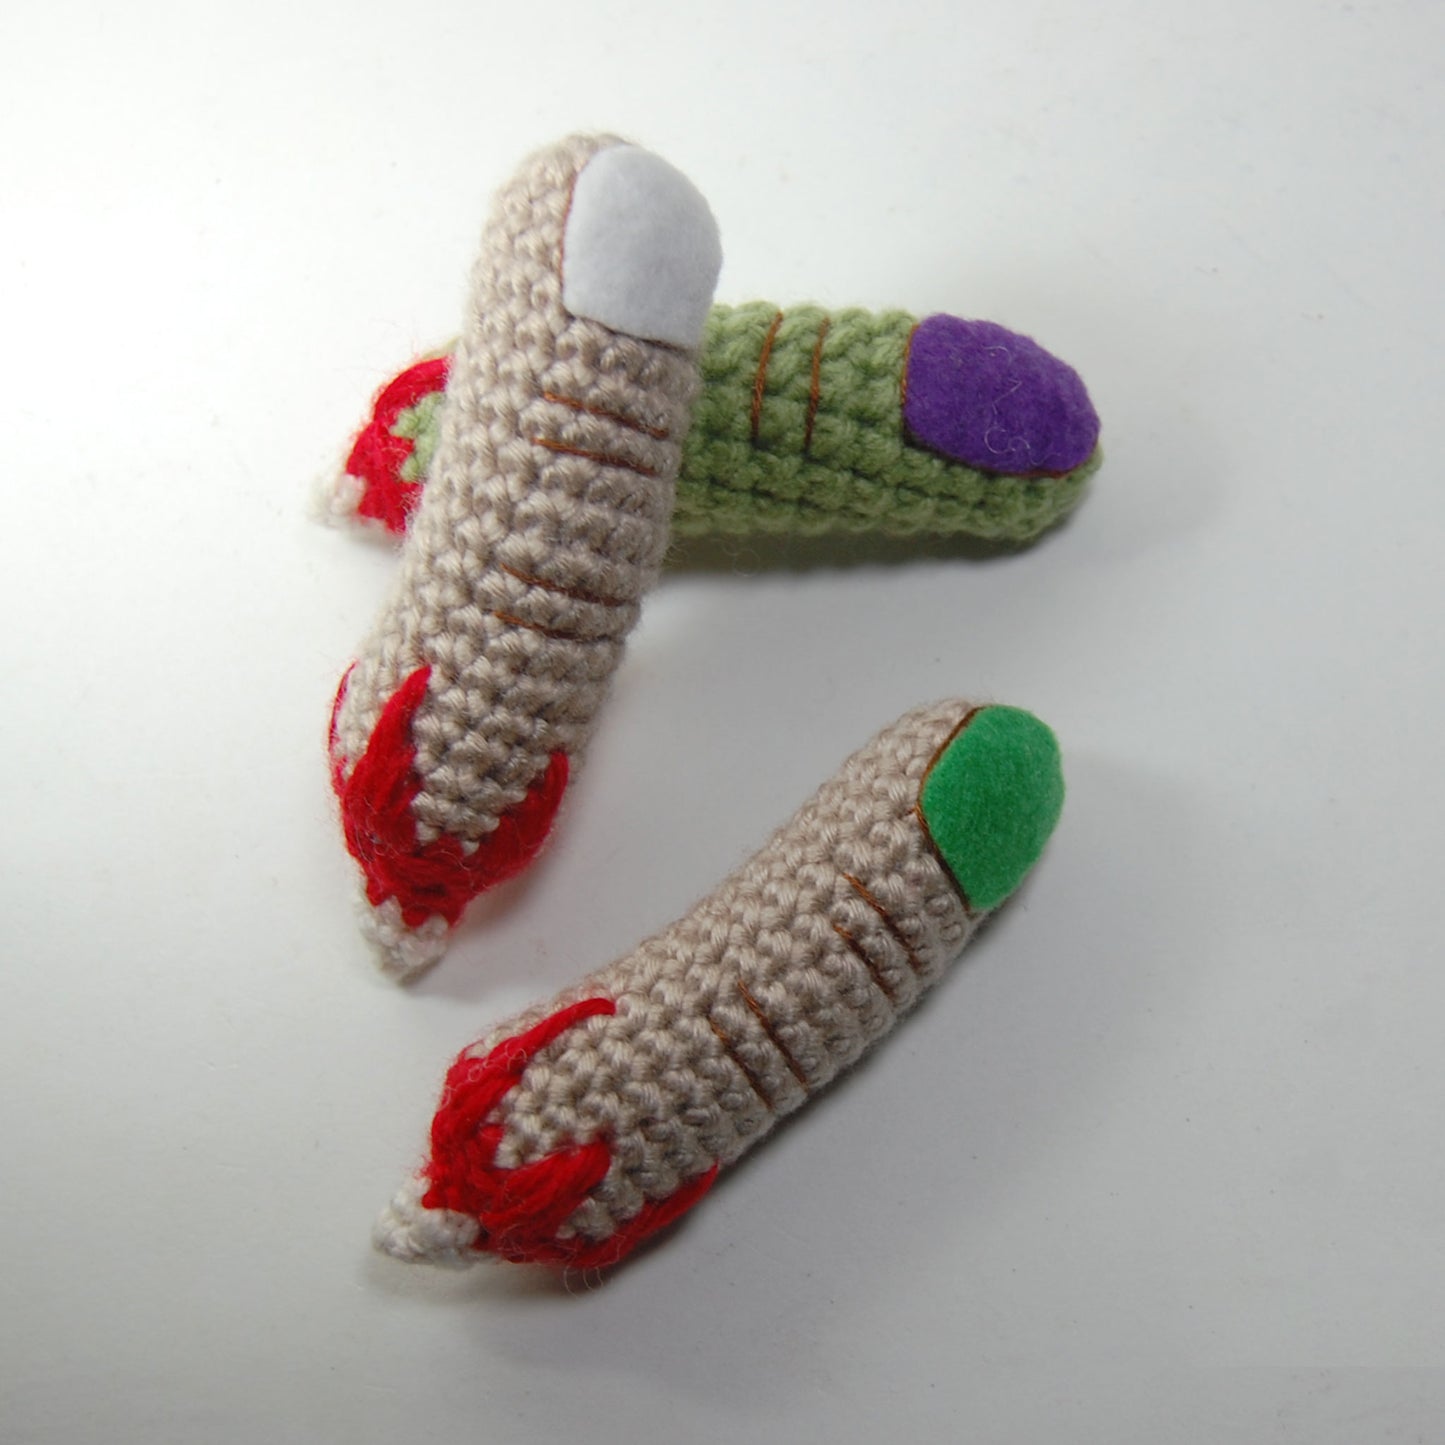 Severed Finger Crochet Pattern (Pay what you can pricing)